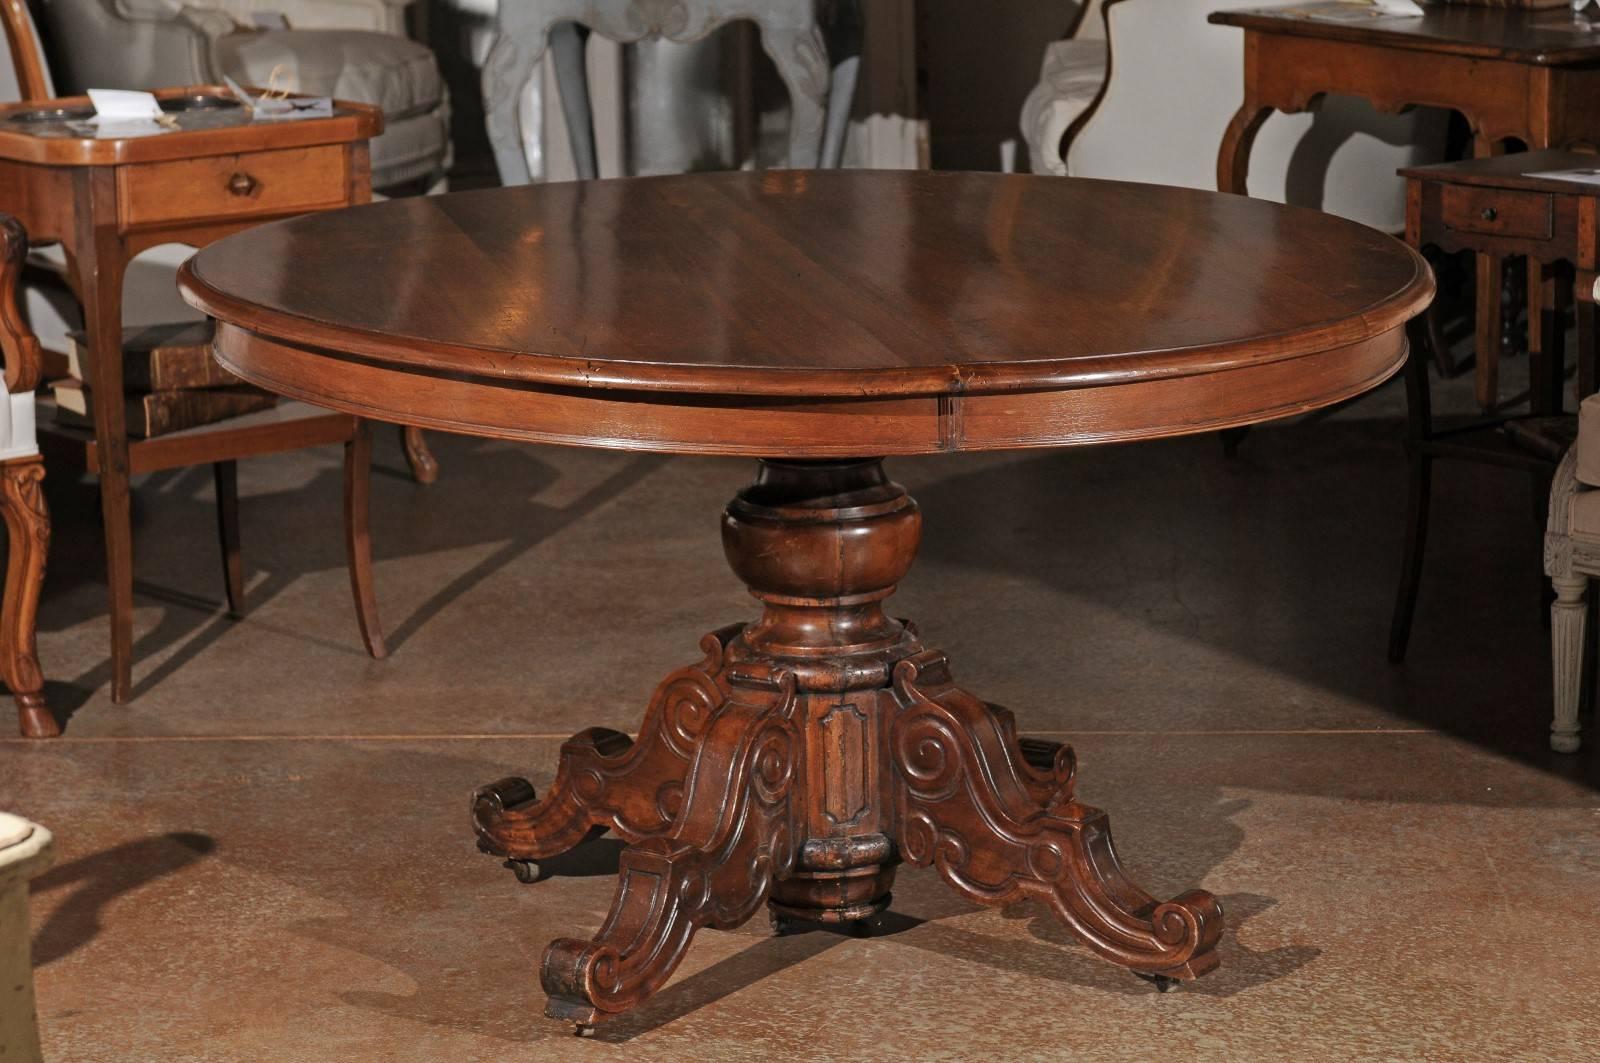 A French Napoleon III round walnut pedestal table with carved base from the mid 19th century. This French table was born in the 1850s, at a time when the first French president, known as Louis Napoléon Bonaparte was about to become Emperor Napoleon